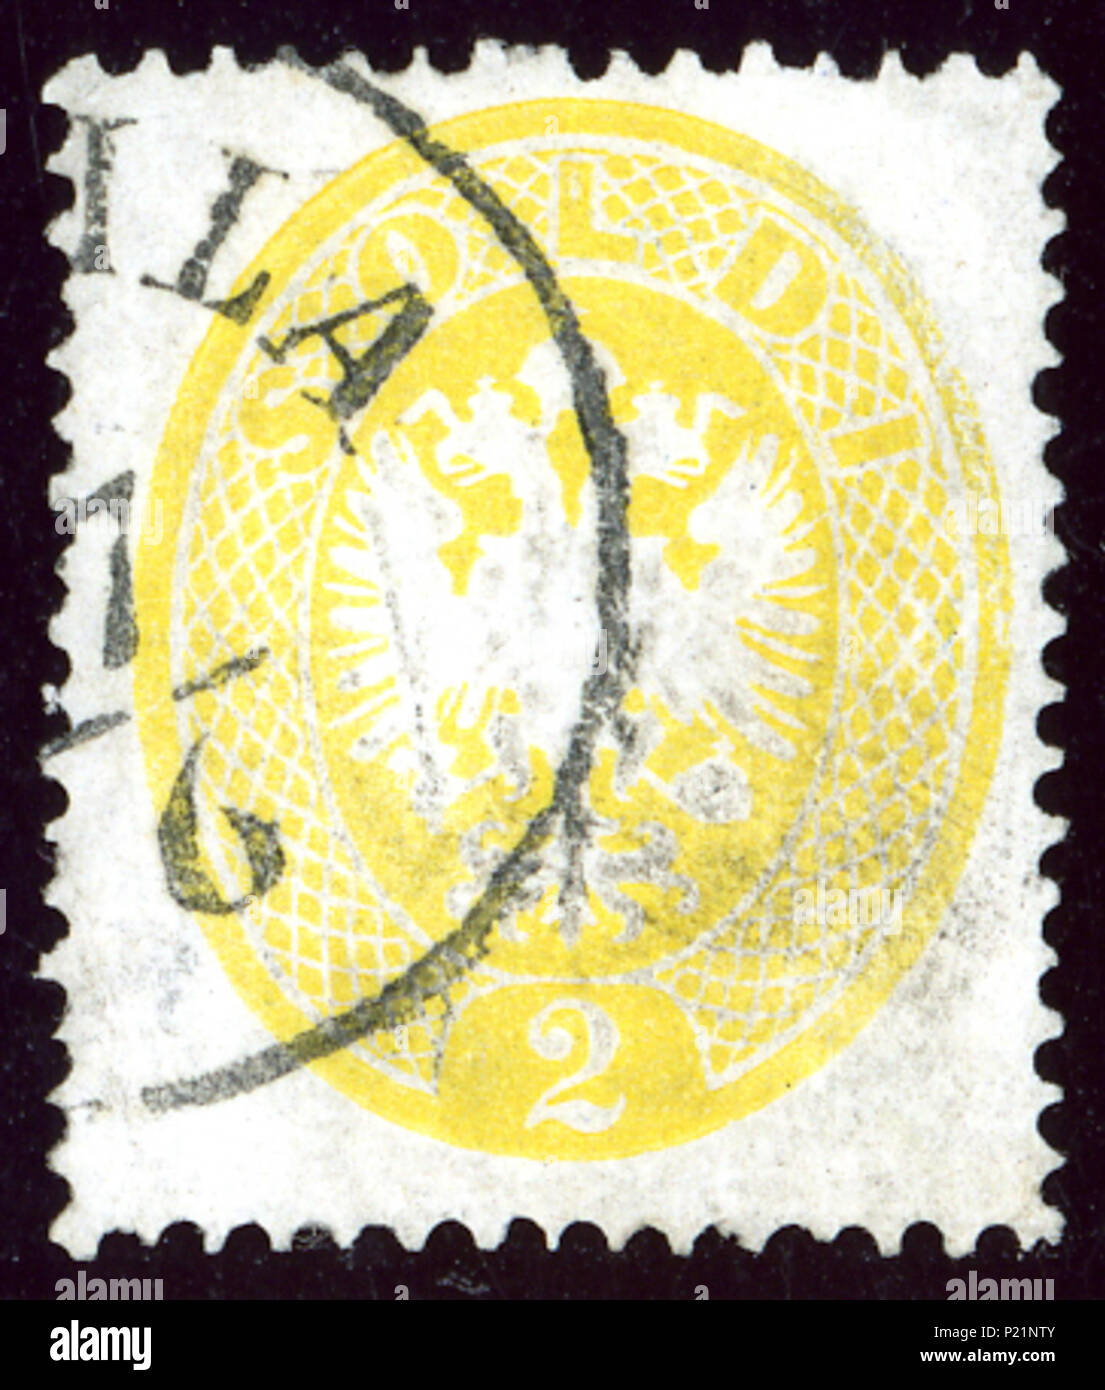 . English: Stamp of Lombardy and Venetia, 2 soldi issue 1863, cancelled JBRAILA (now Romania). Michel N°LV14. Müller postmark: Levant 27b type RS-f (40) . 13 March 2014, 10:39:10. Jacquesverlaeken 2 1863 LV 2soldi JBRAILA MiLV14 Stock Photo